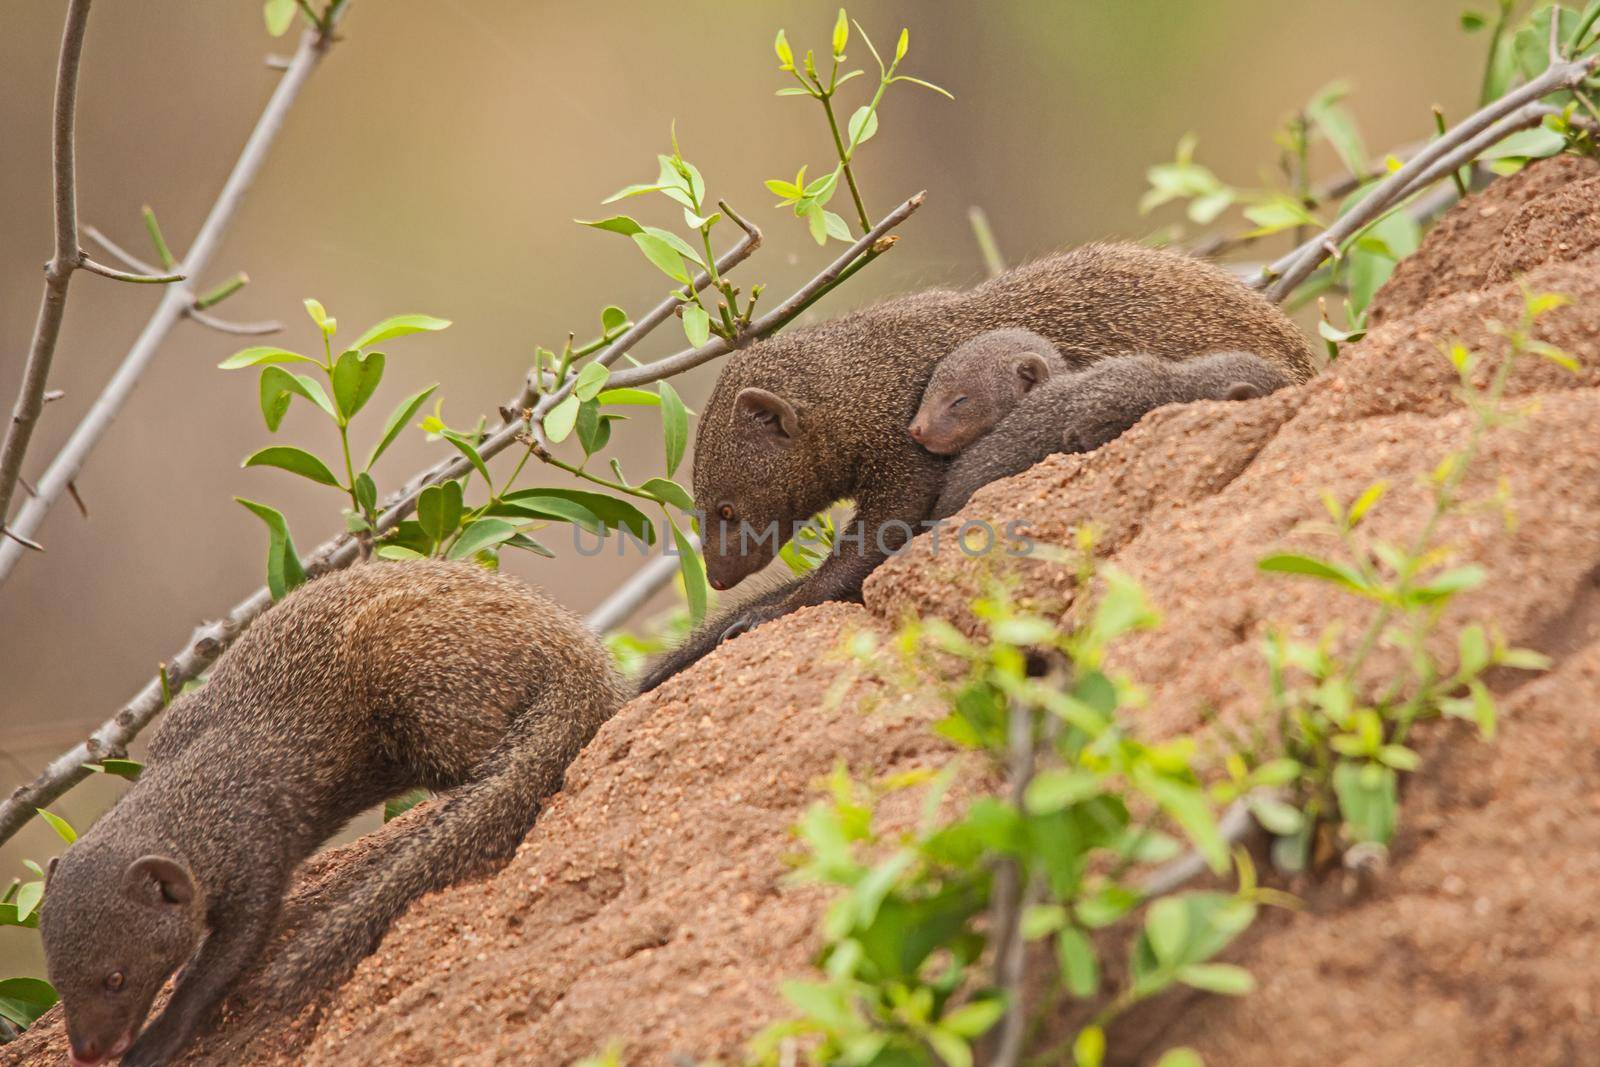 Dwarf Mongoose (Helogale parvula) mother with sleeping babies 13815 by kobus_peche